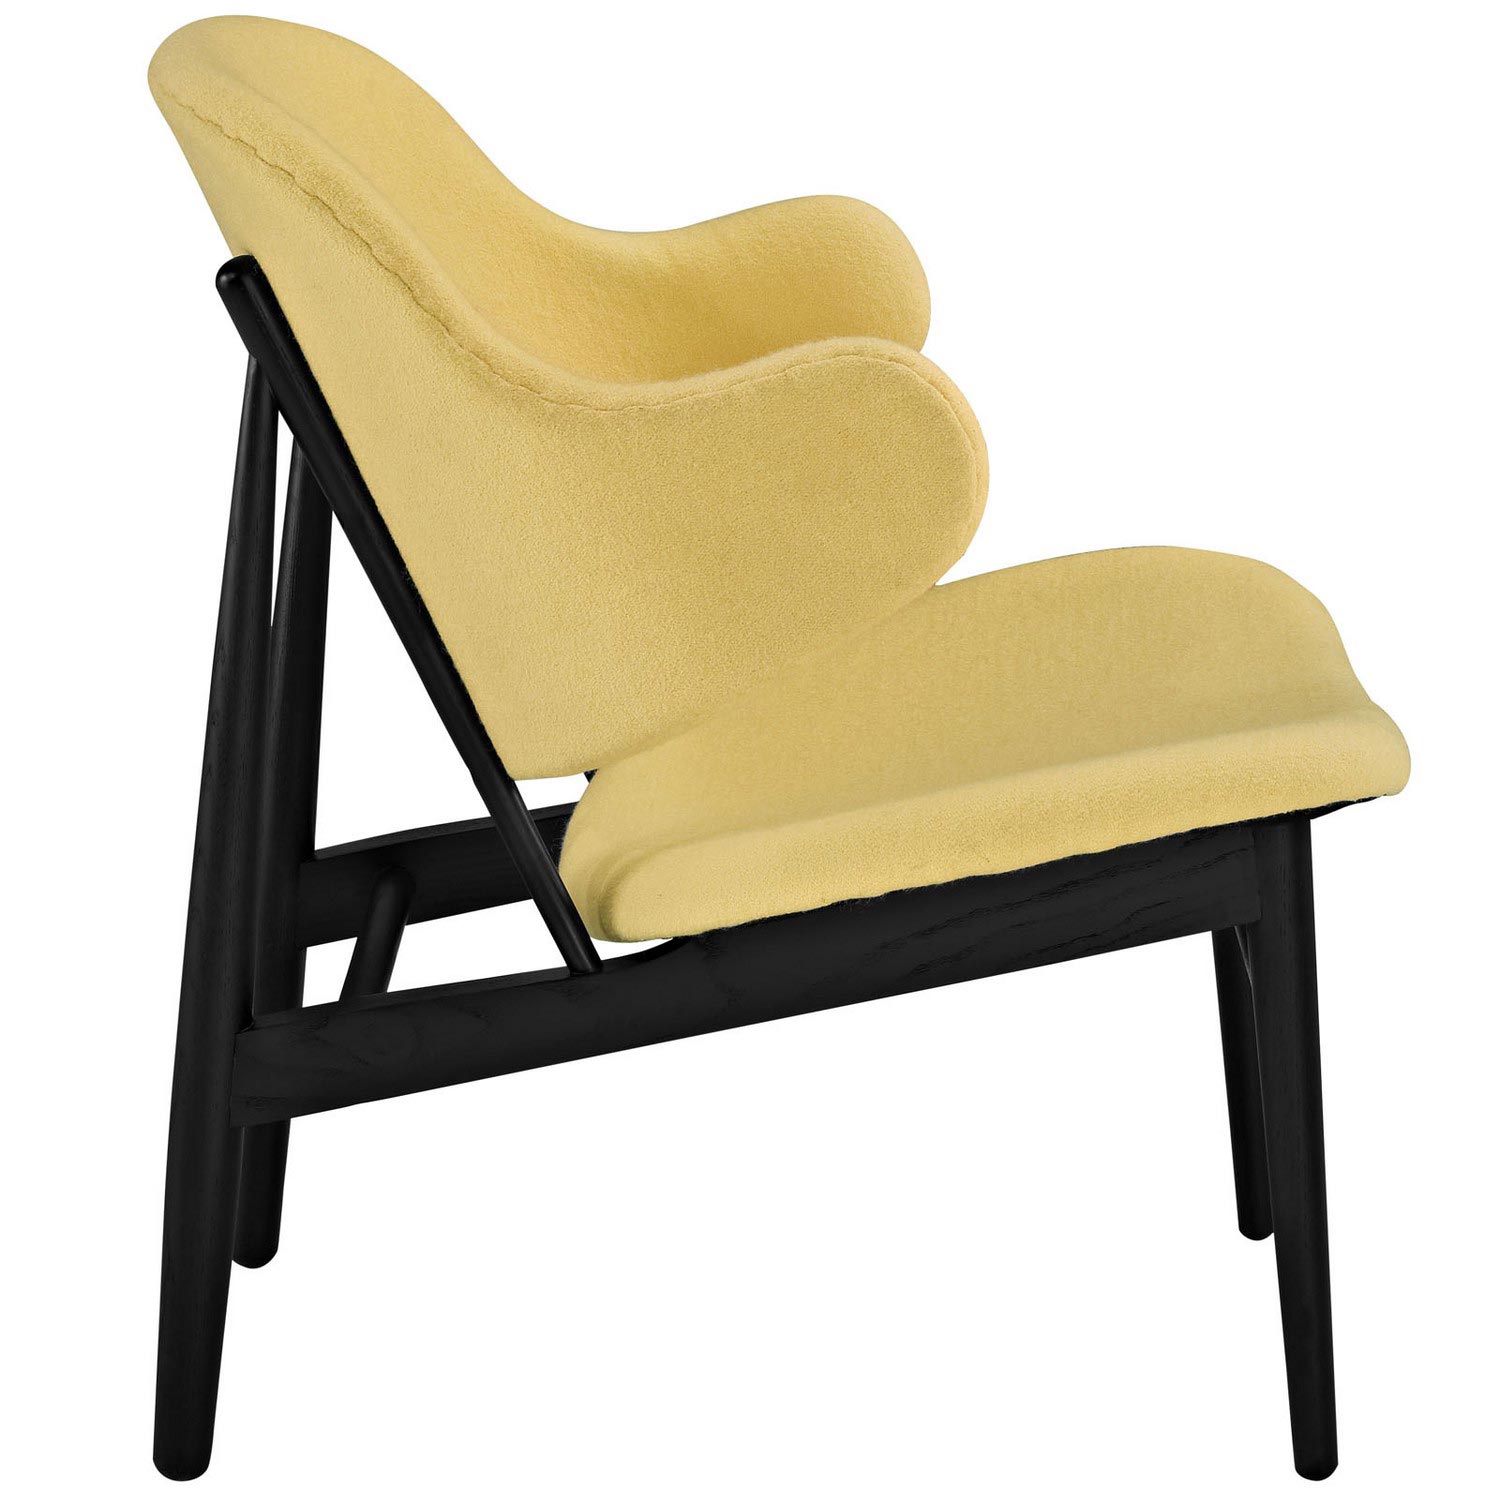 Modway Suffuse Lounge Chair - Black/Yellow